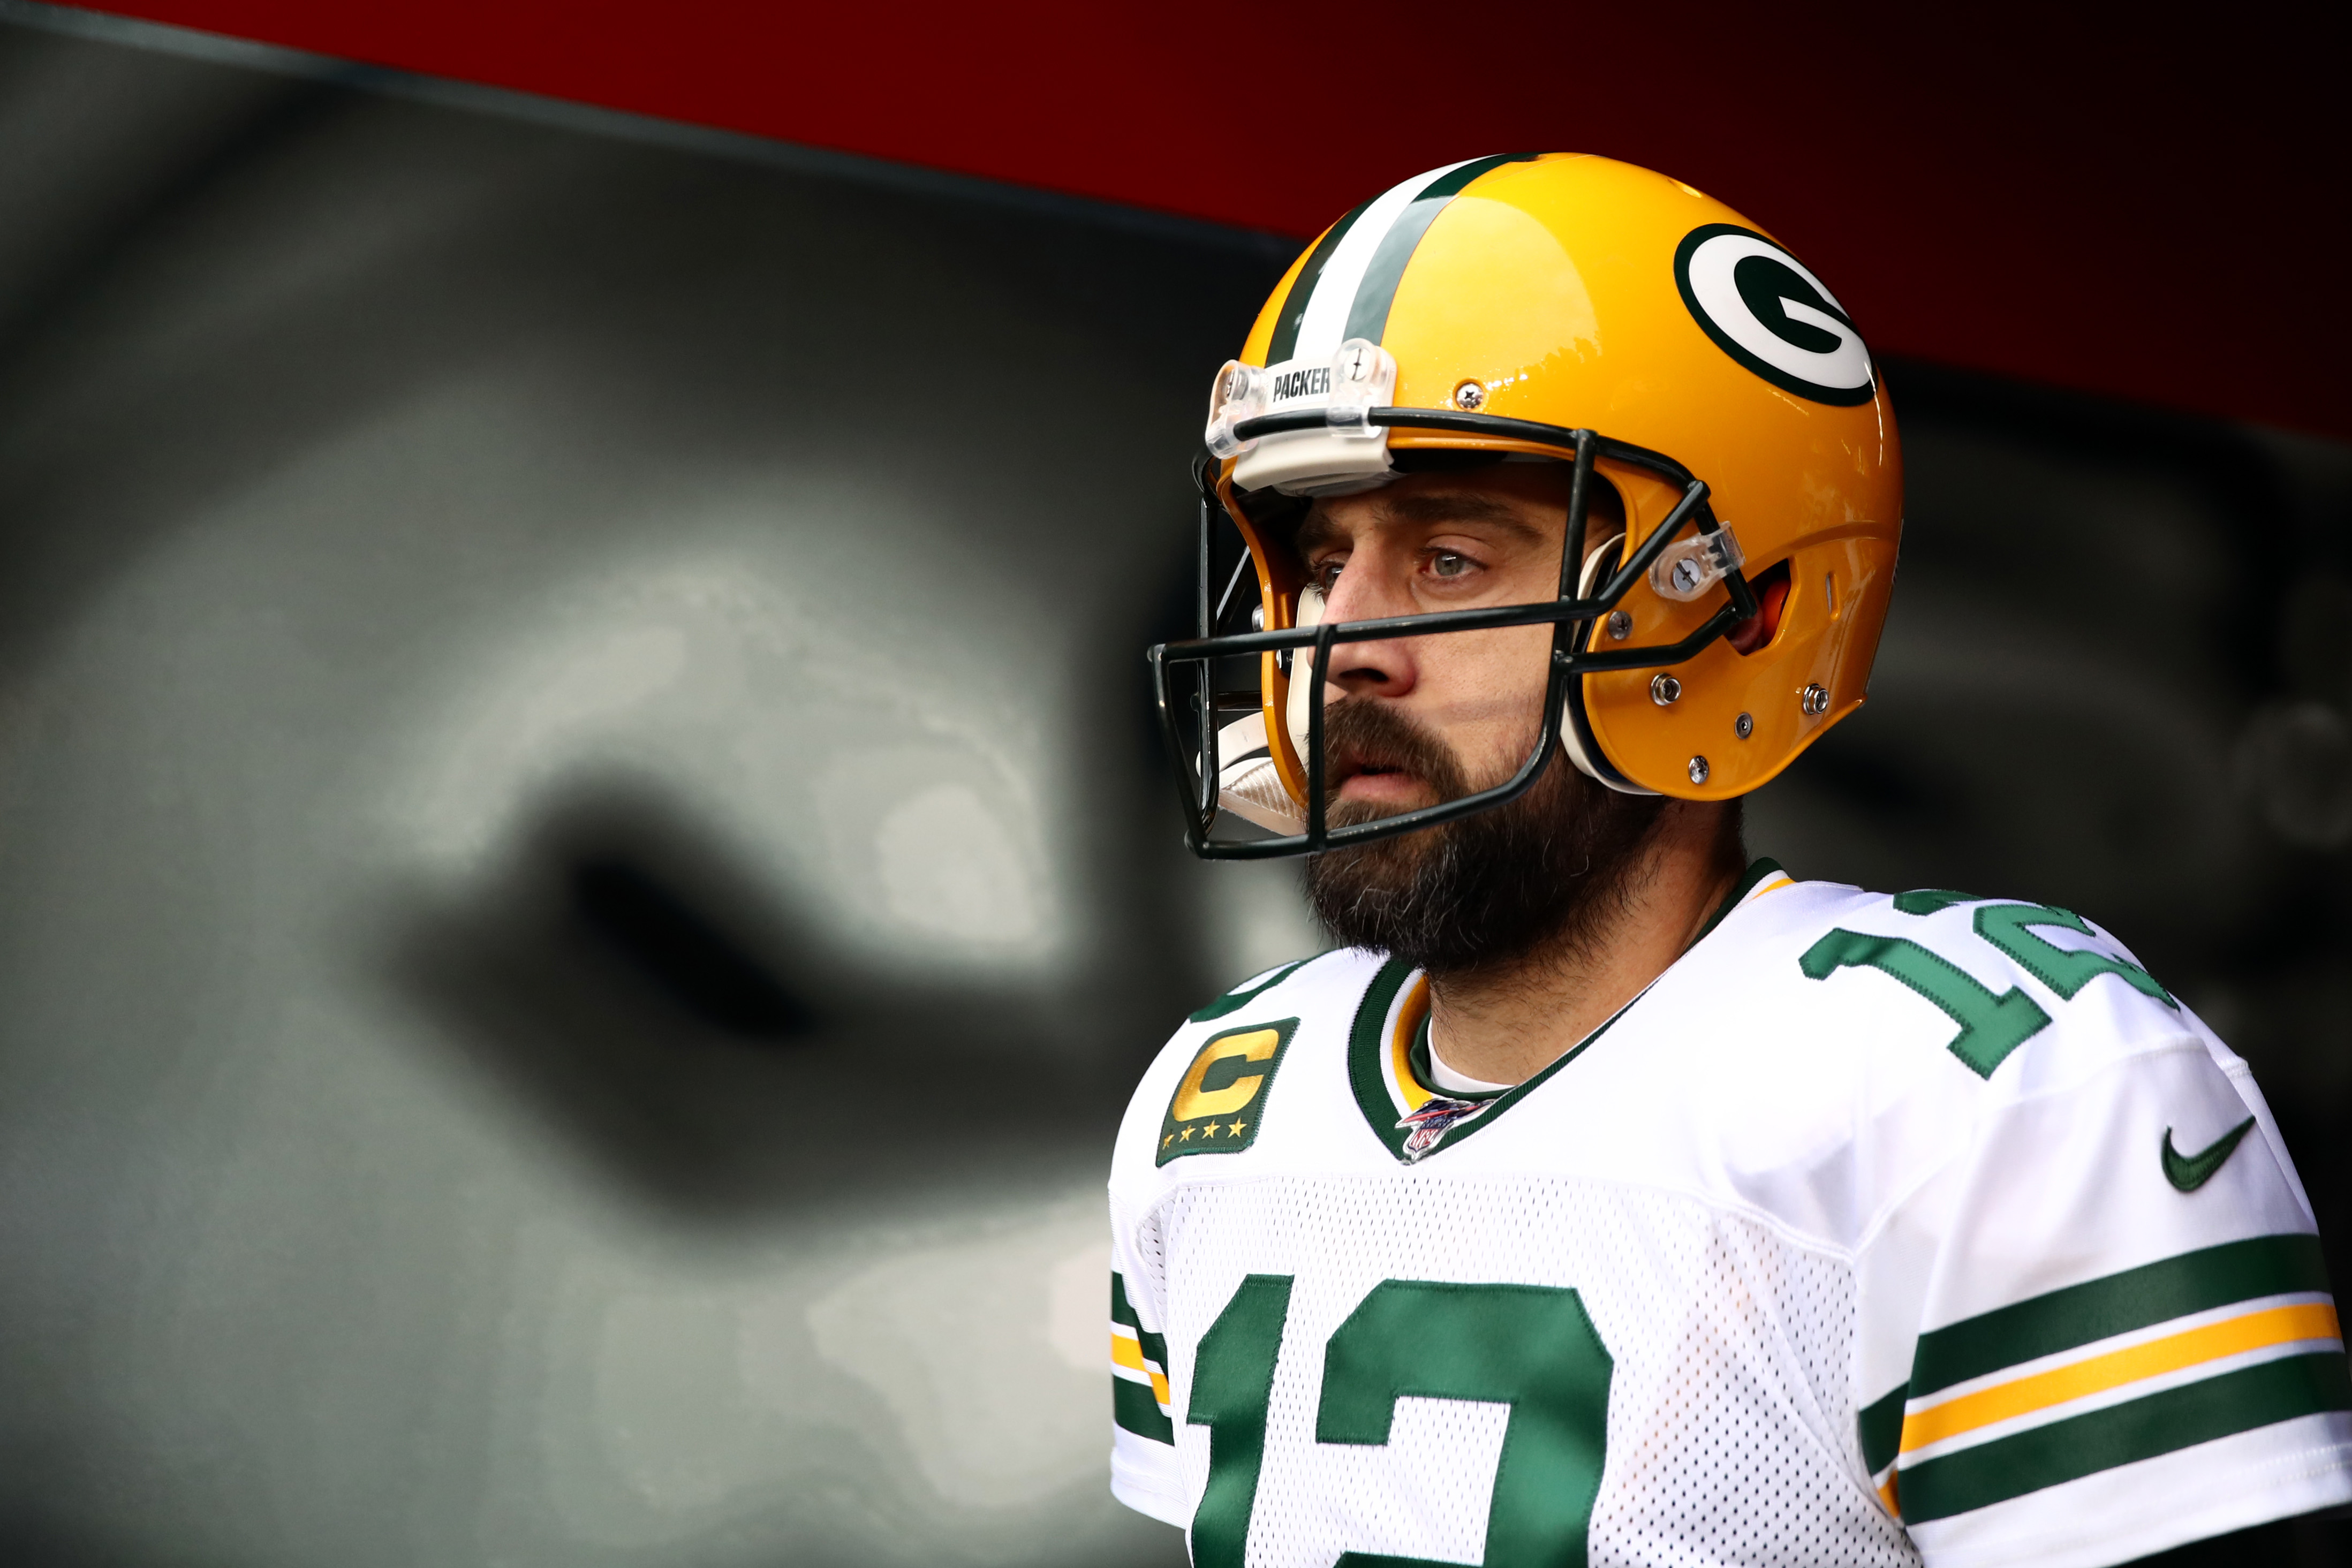 Aaron Rodgers, QB, Green Bay Packers 